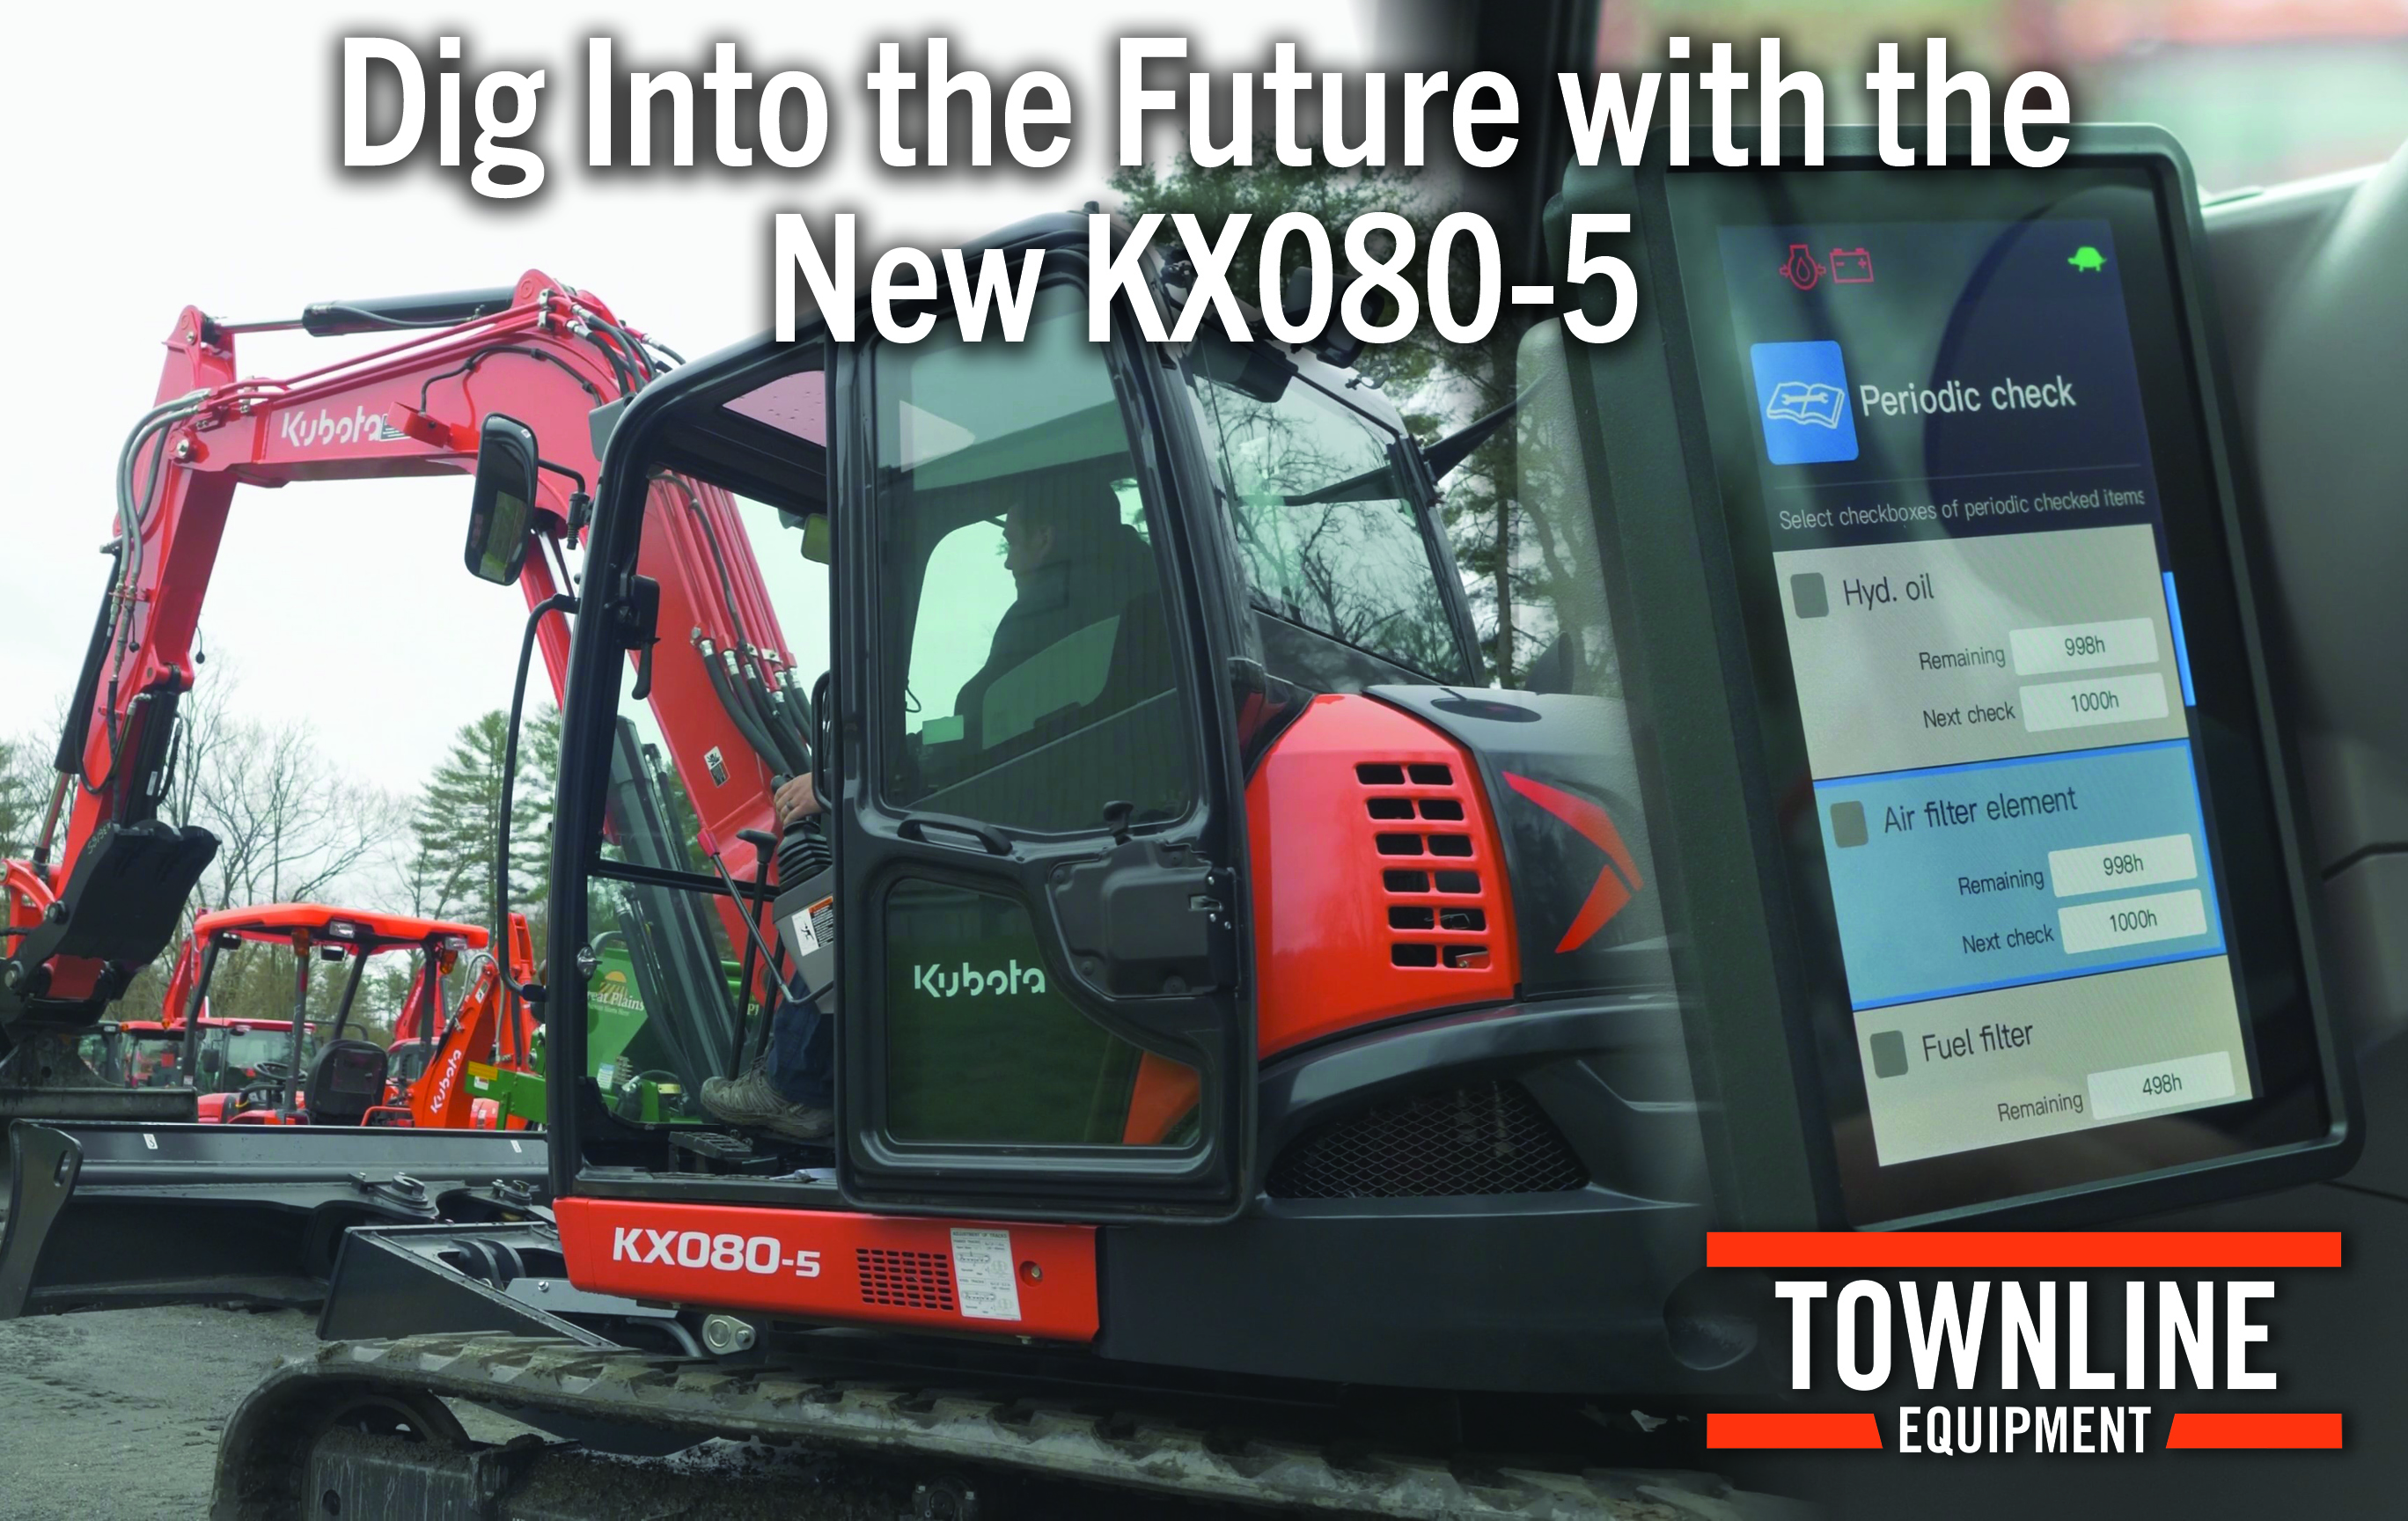 KX080-5: Dig Into The Future